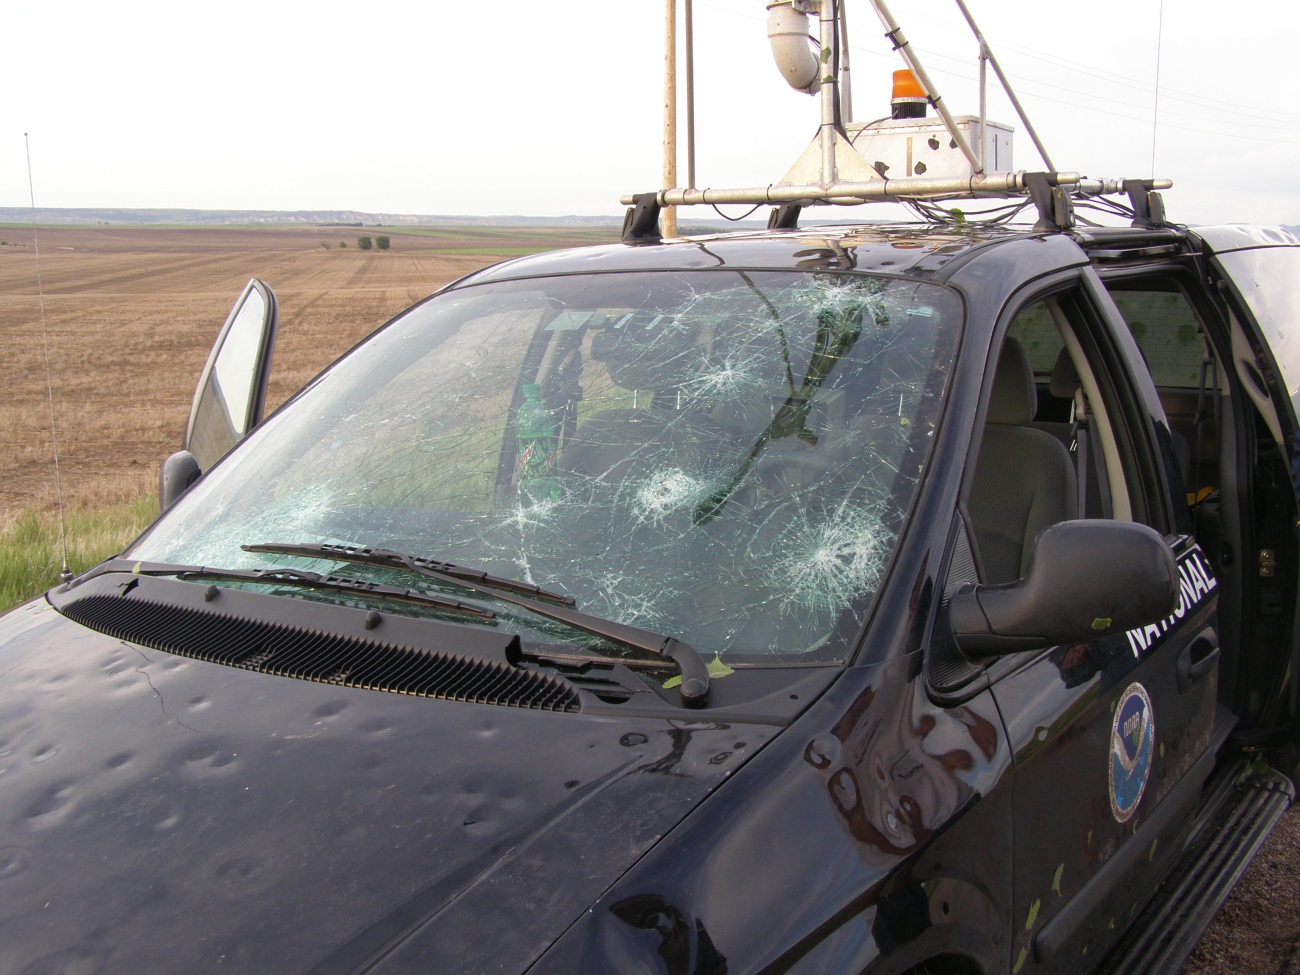 The tornadic storm observed earlier was accompanied by largedangerous hail which smashed the windshield of this National Severe StormsLaboratory instrumented vehicle